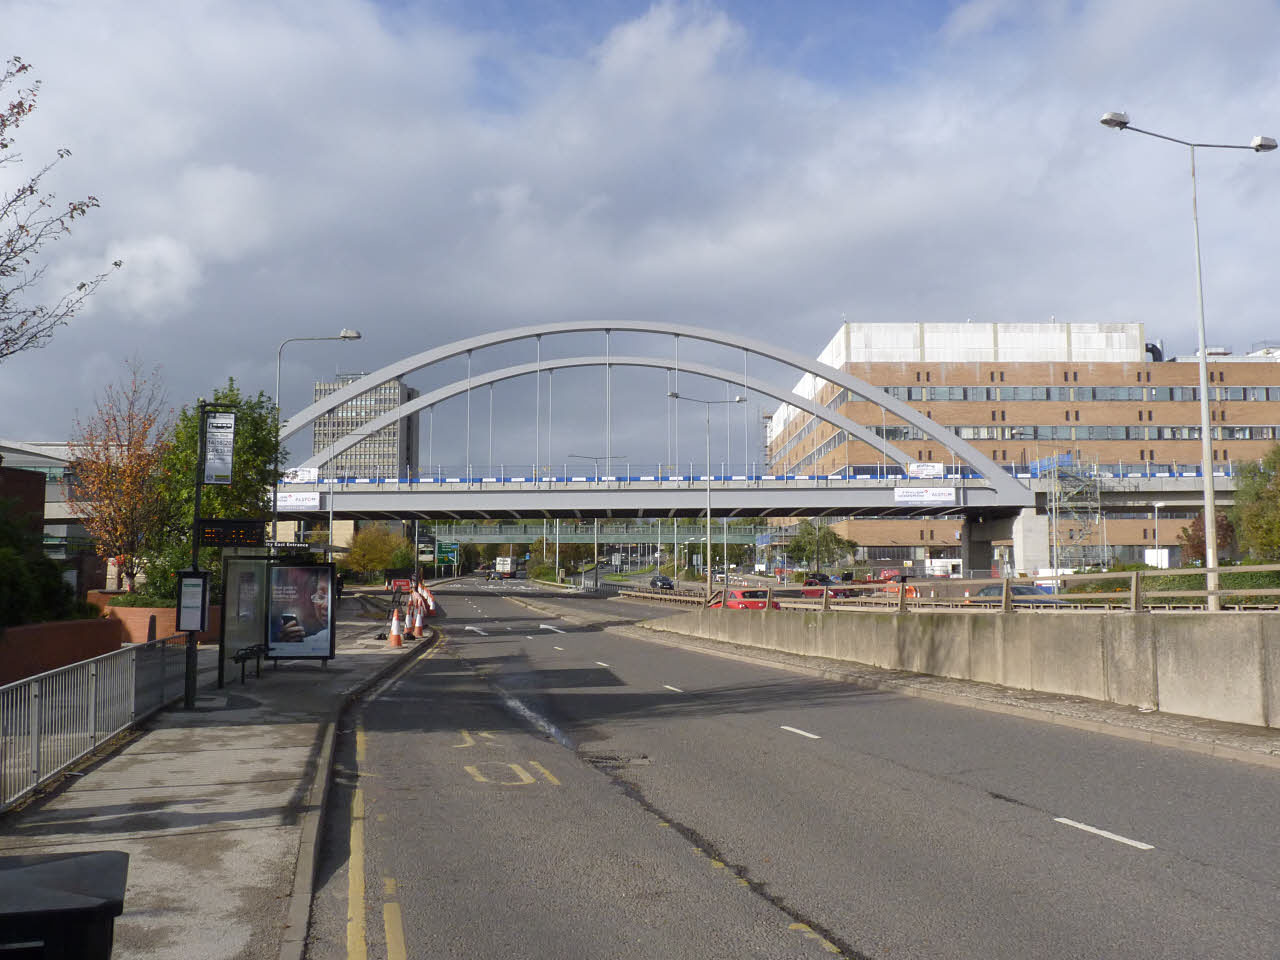 Day time picture of the Ningbo Friendship Bridge over the A52 road, with Queen's Medical Centre in the background.